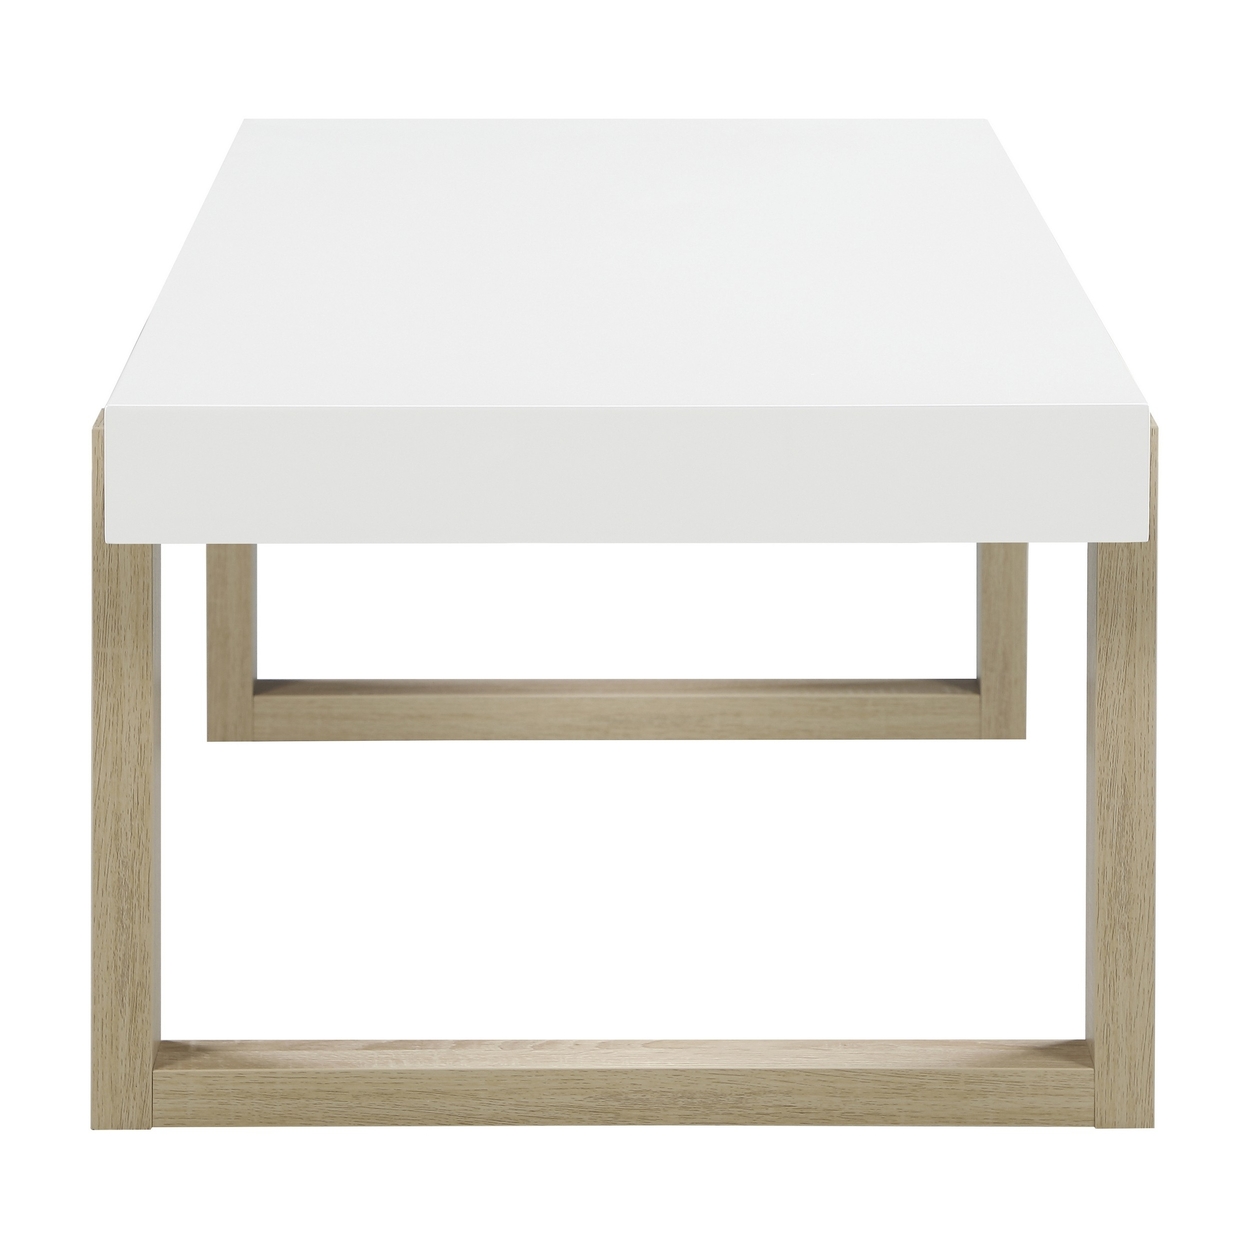 Shay 47 Inch Coffee Table, Thick Rectangular Tabletop, High Gloss White